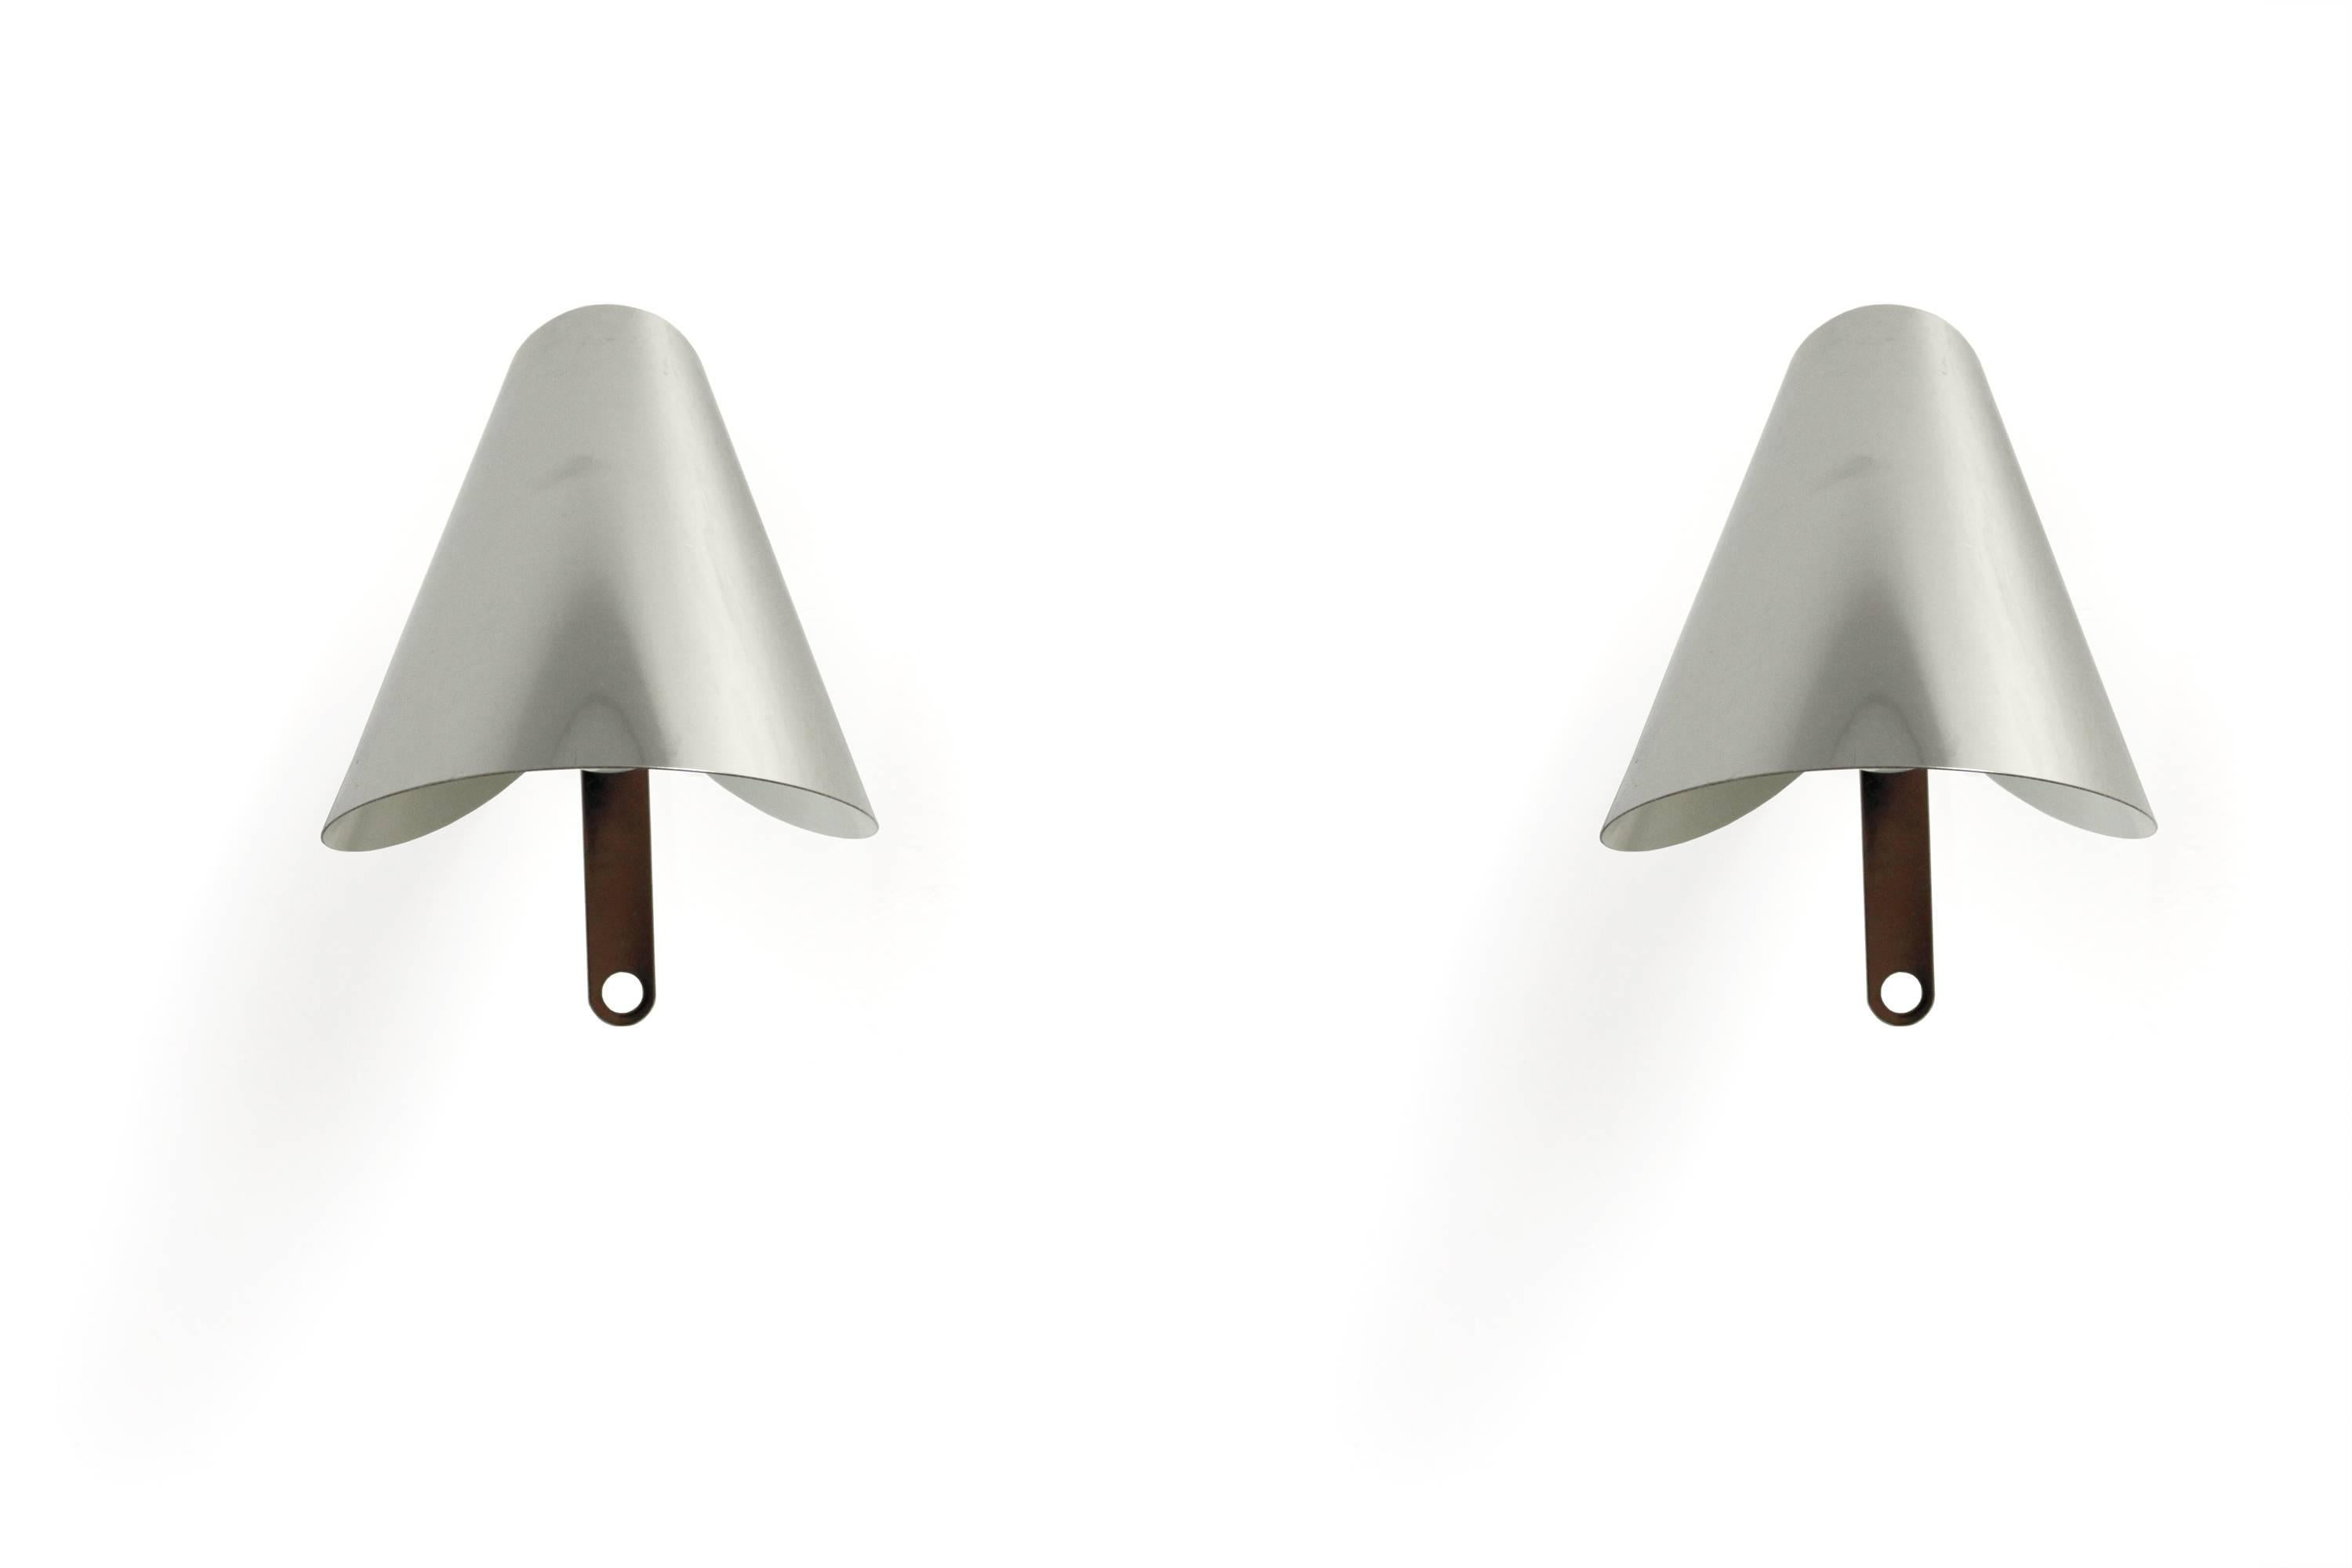 Articulating pair of wall lights in chrome.

Most likely designed and made in Sweden, circa 1970s first half.

Both lamps are fully working and in excellent vintage condition.